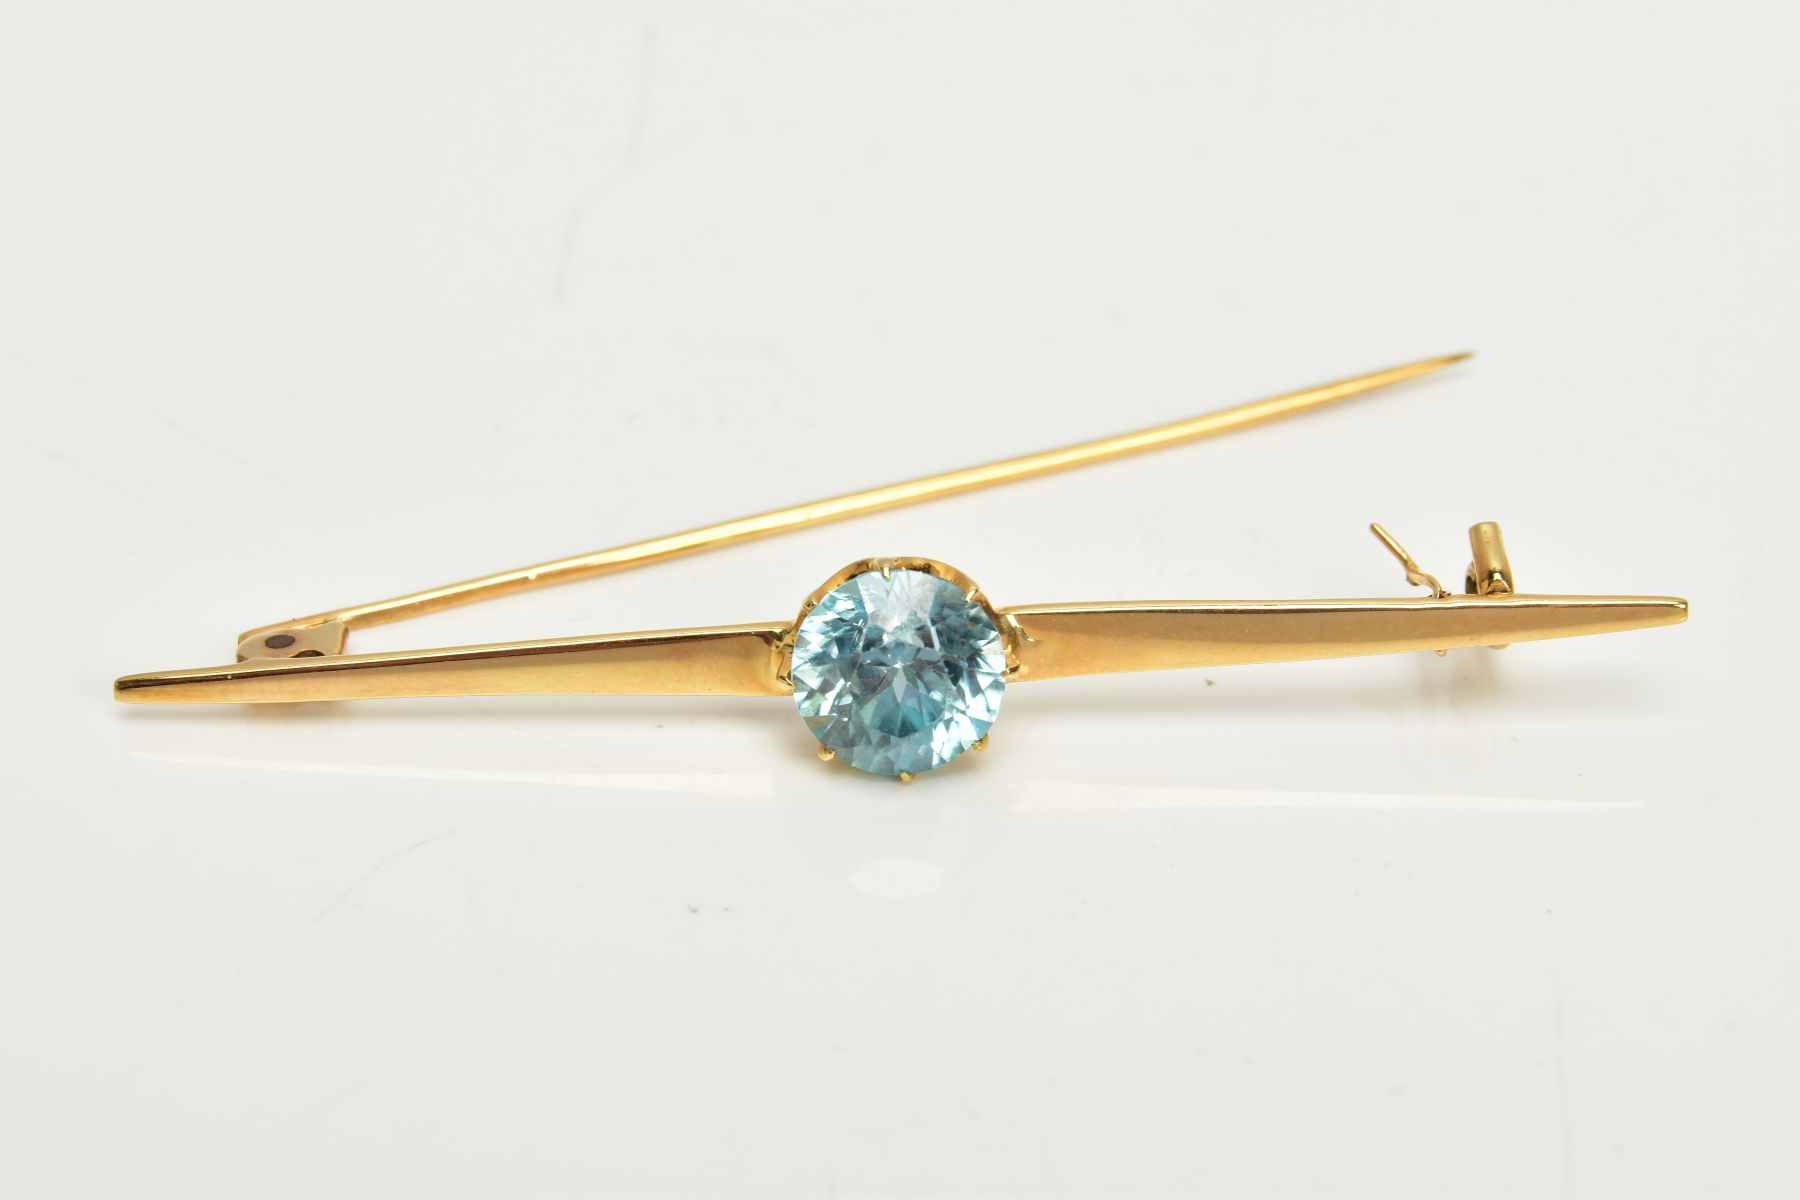 A YELLOW METAL ZIRCON BAR BROOCH, set with a circular blue zircon, measuring approximately 8.5 x 8. - Image 4 of 4